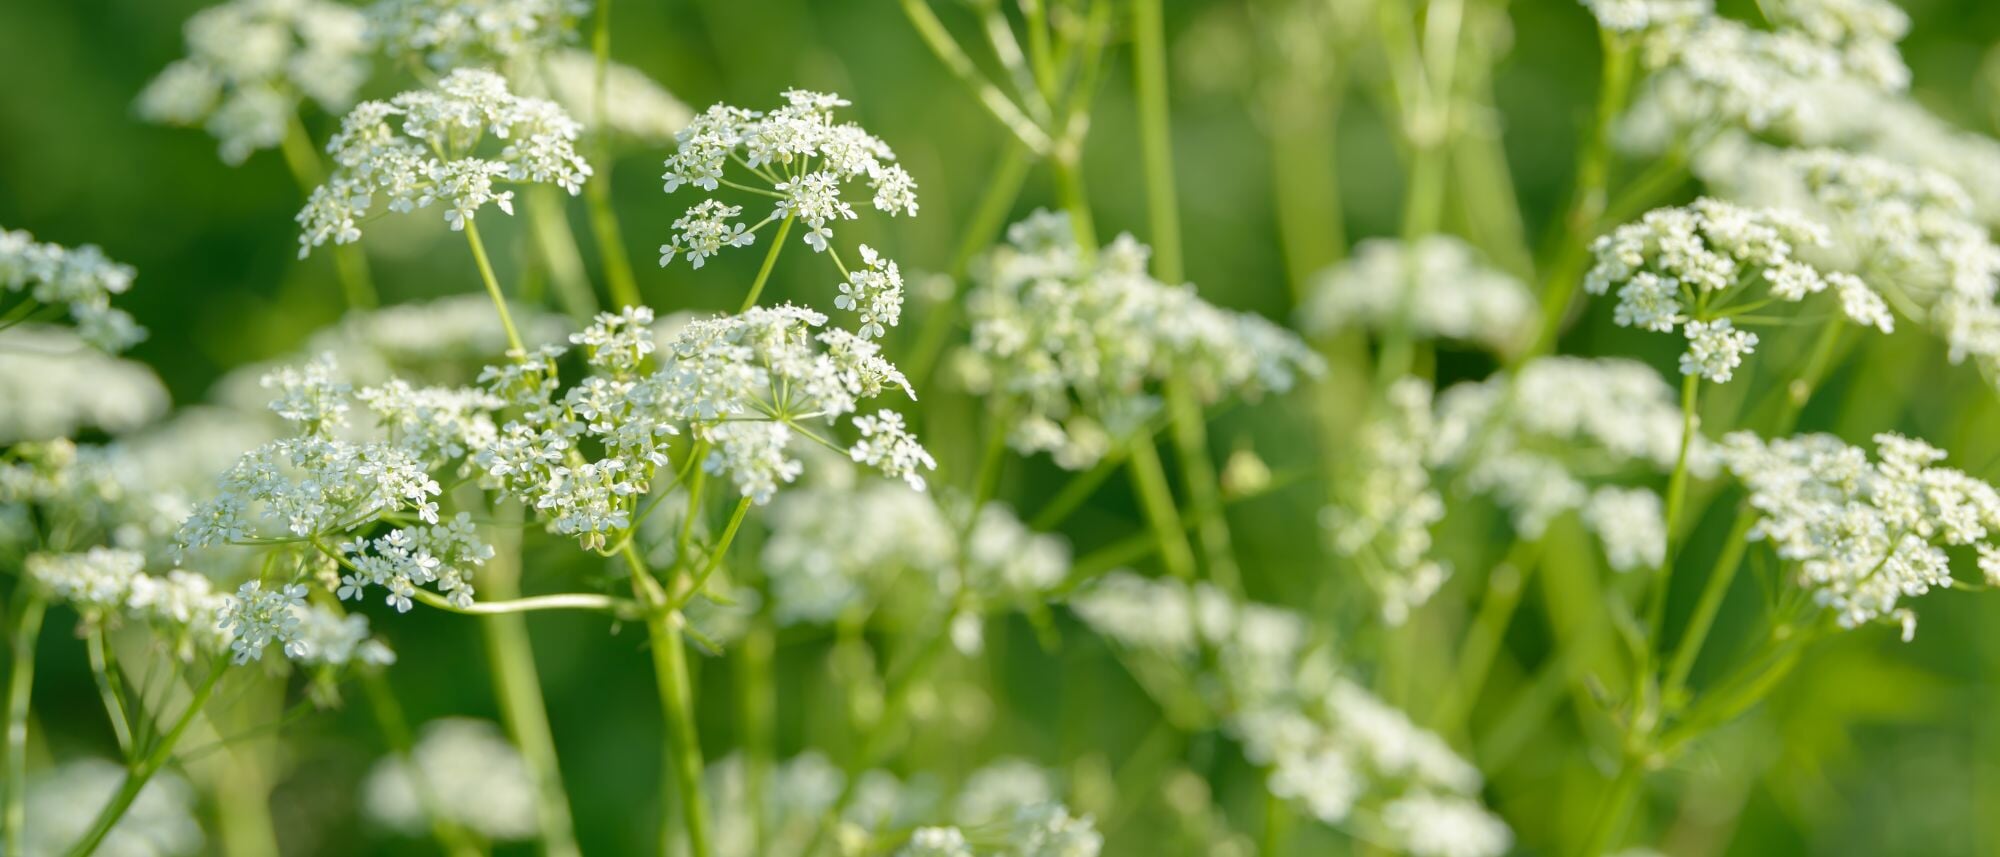 Grow lovely white aniseed in your herb garden